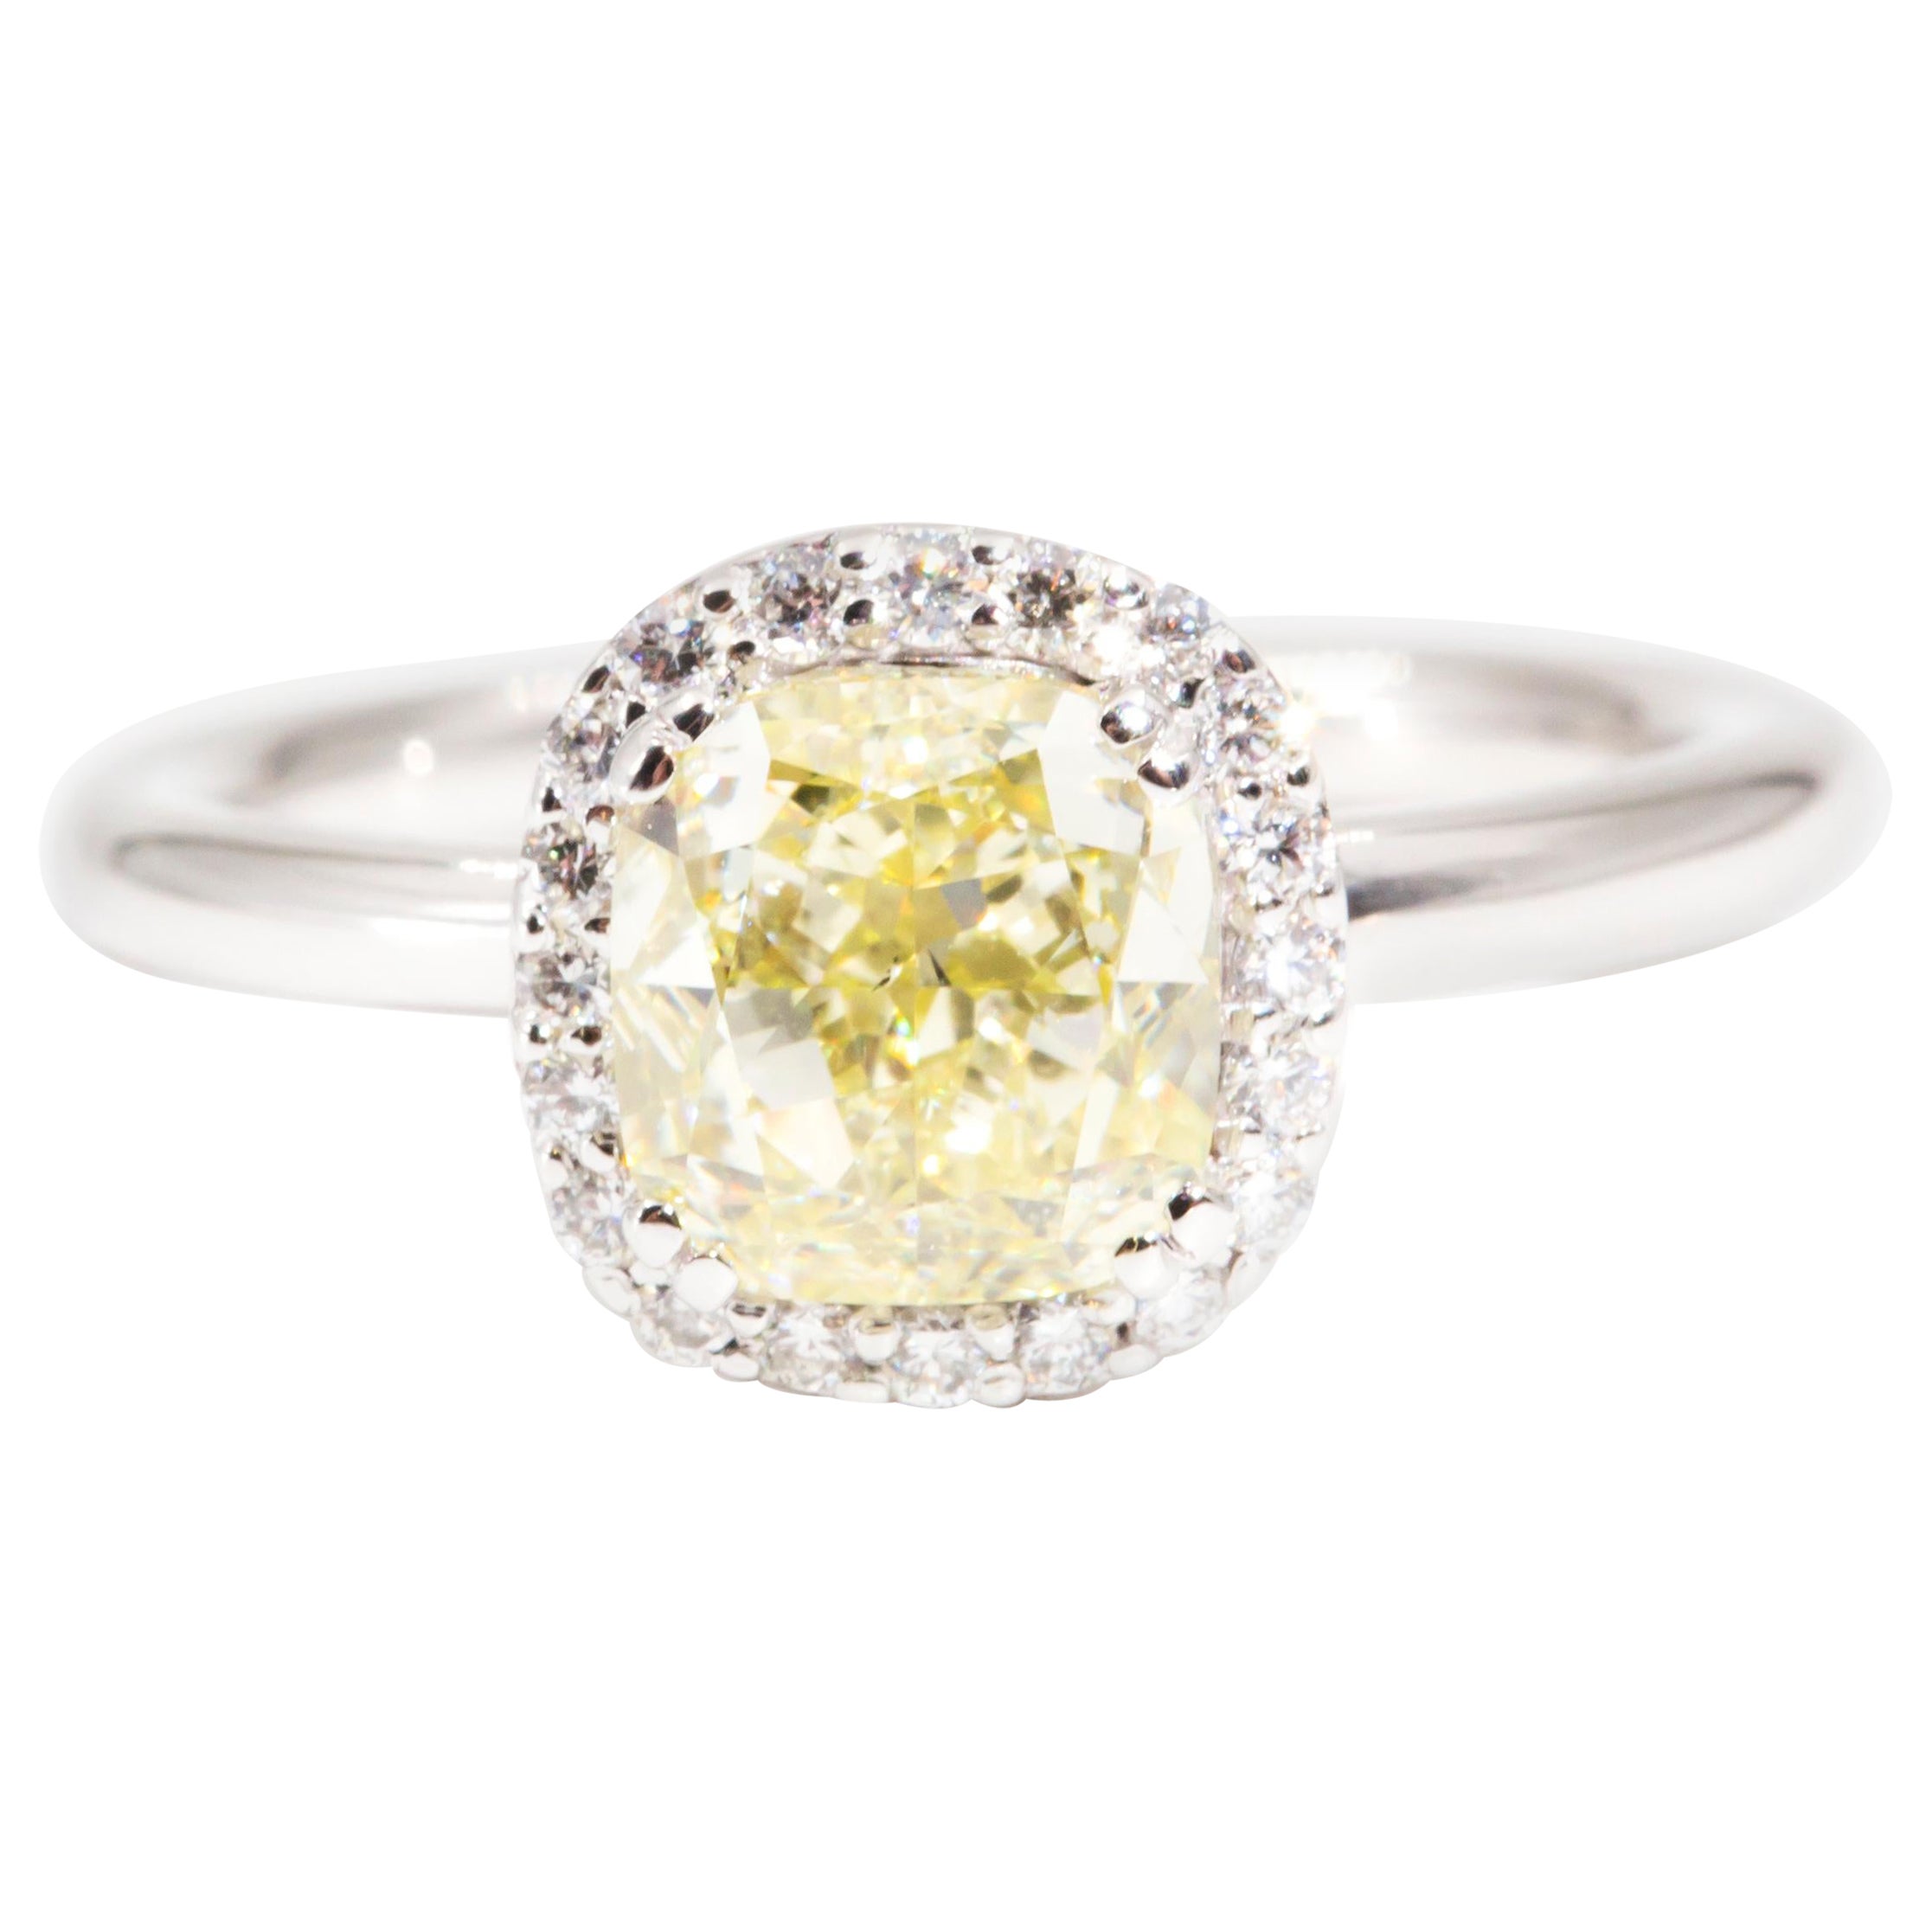 GIA Certified 2.00 Carat Fancy Yellow Diamond Contemporary Halo Engagement Ring